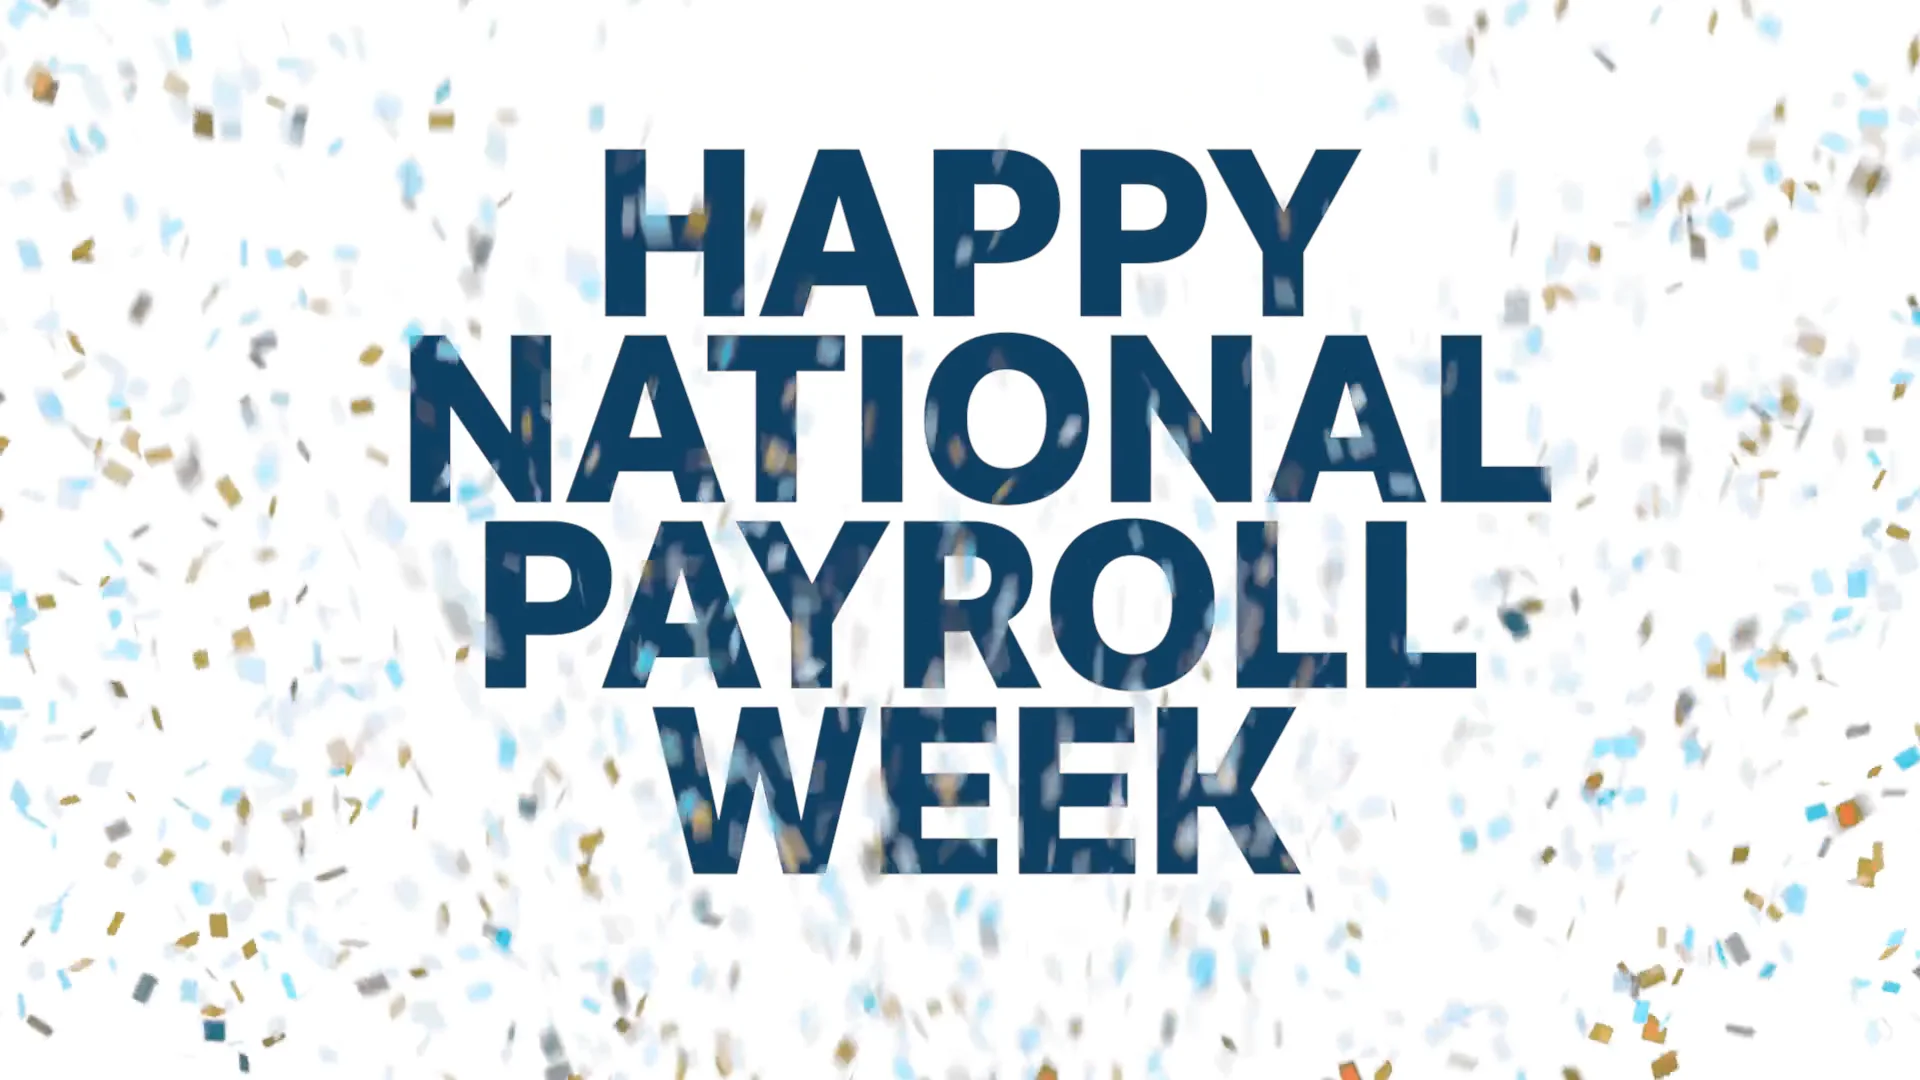 Welcome to National Payroll Week 2019!